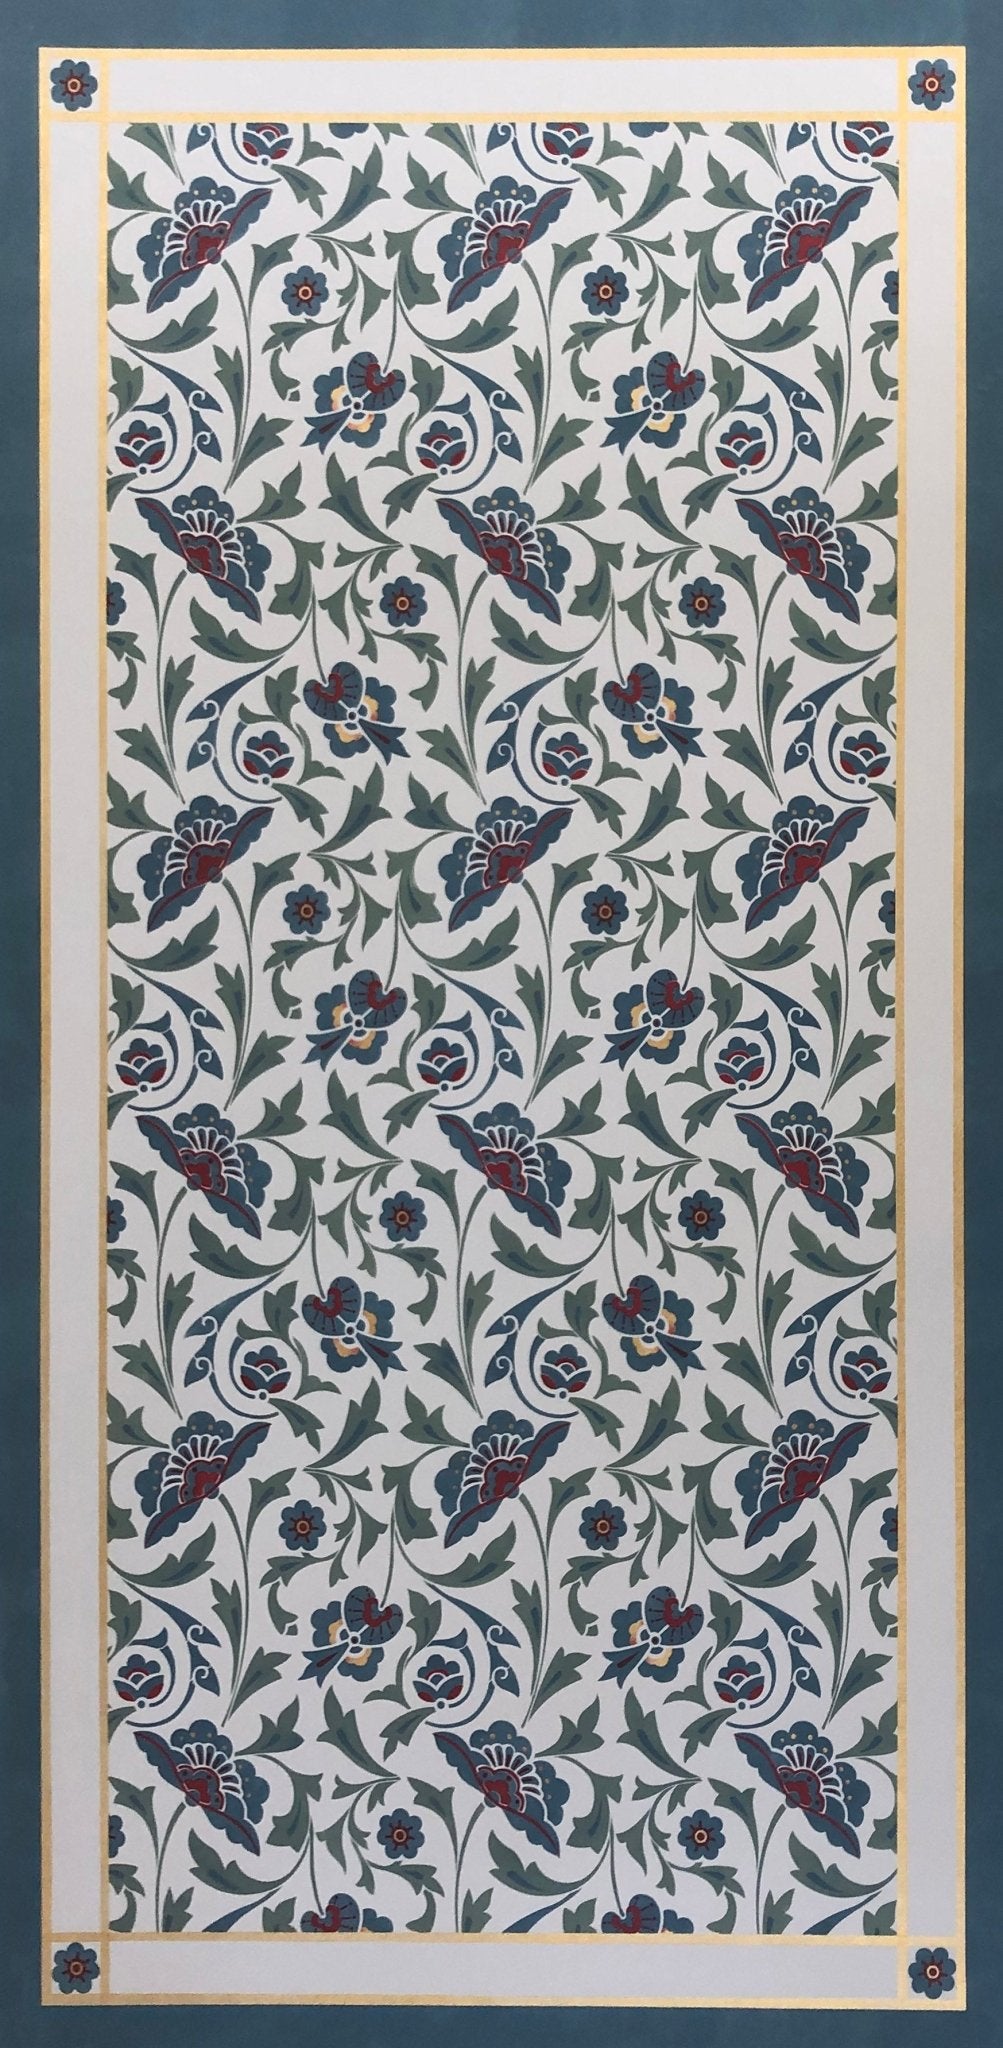 A full image of All-Over-Floral Floorcloth #7.